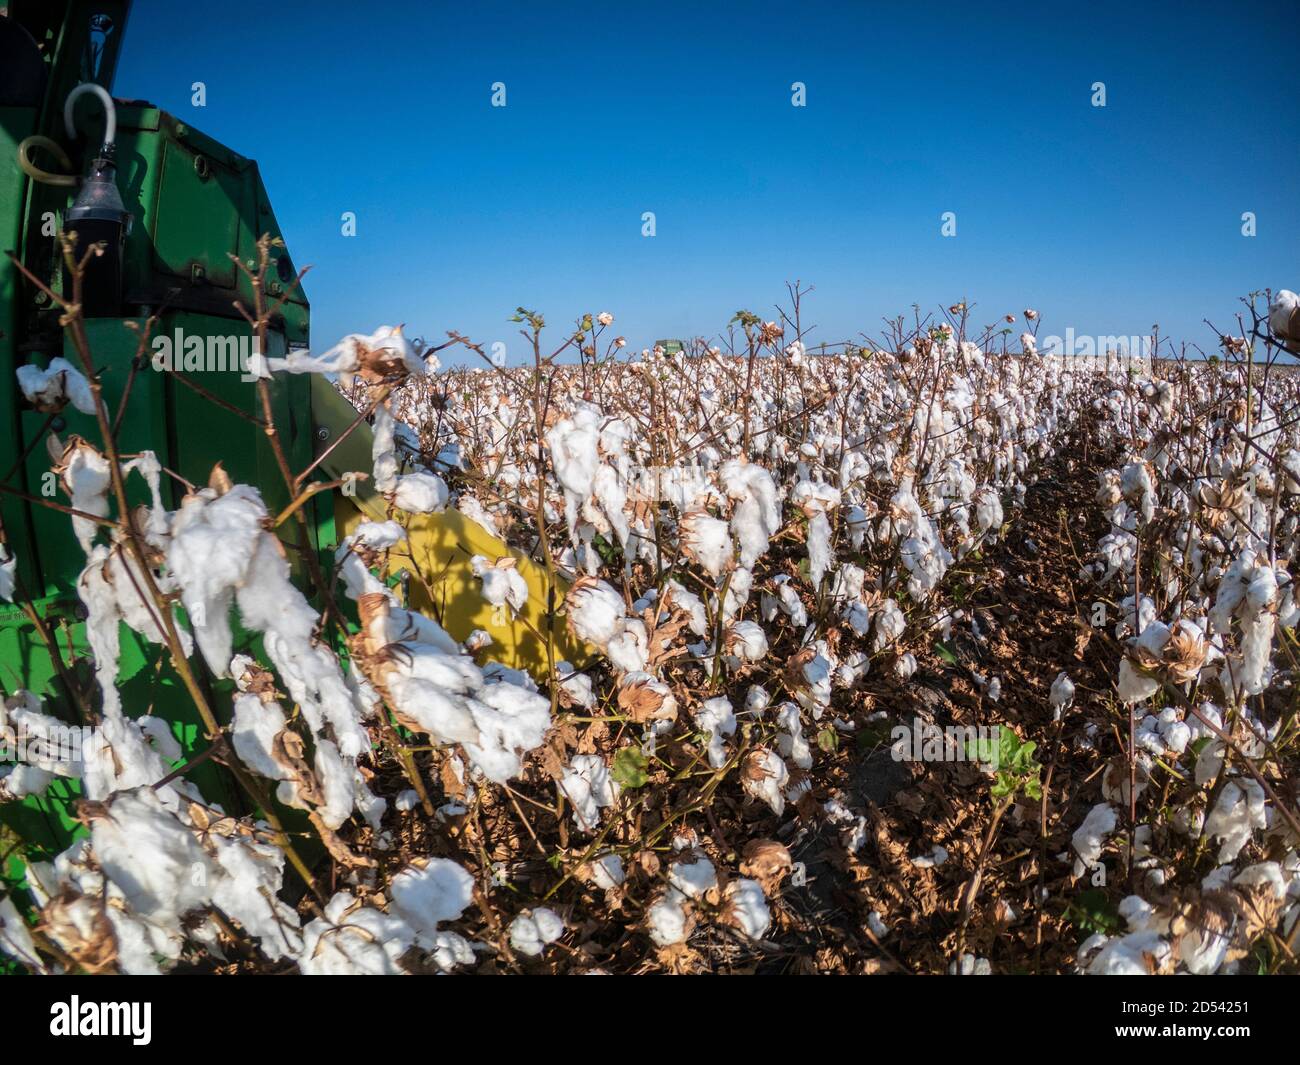 A speciality cotton picking harvester during the cotton harvest at Schirmer Farms August 22, 2020 in Batesville, Texas. Stock Photo